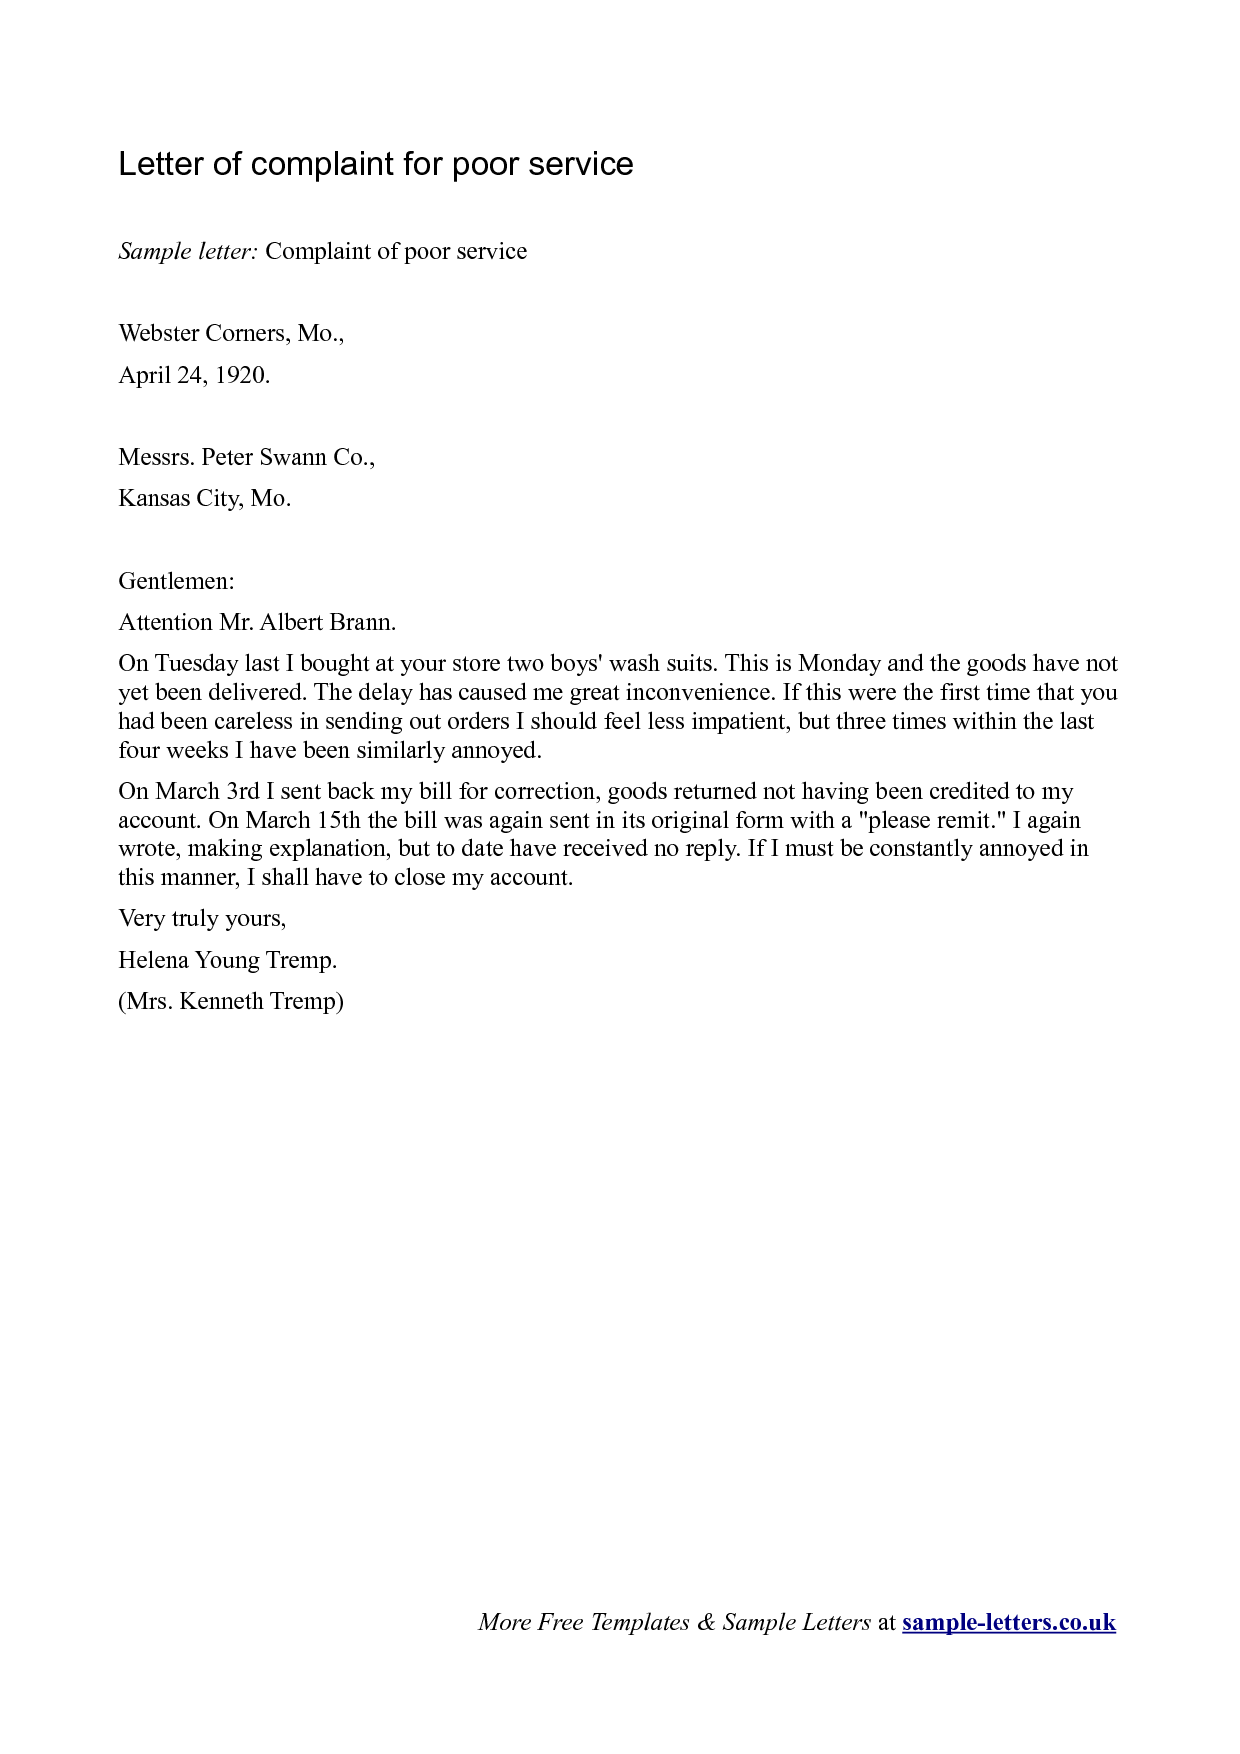 Sample Letter Of Complaint For Poor Service Archives Corrochio 